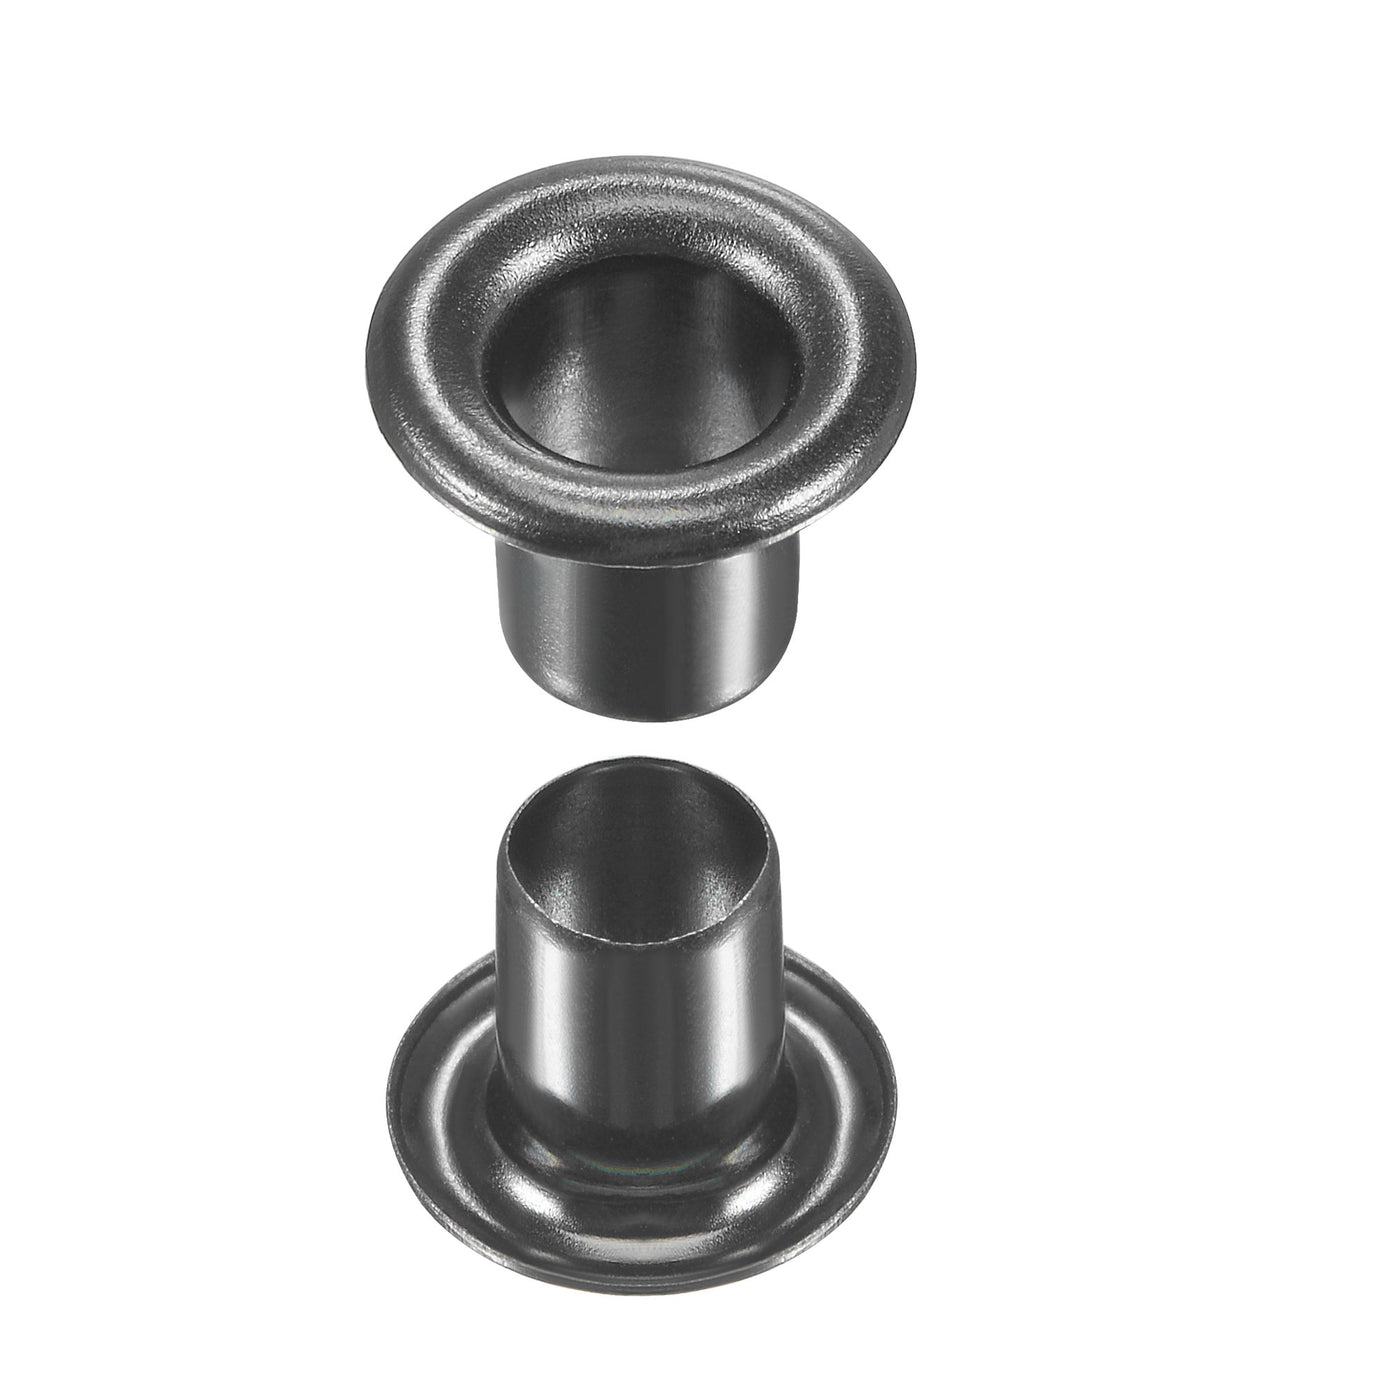 uxcell Uxcell Eyelet with Washer 9x4.5x7mm Copper Grommet Chrome Plated Black 200 Set